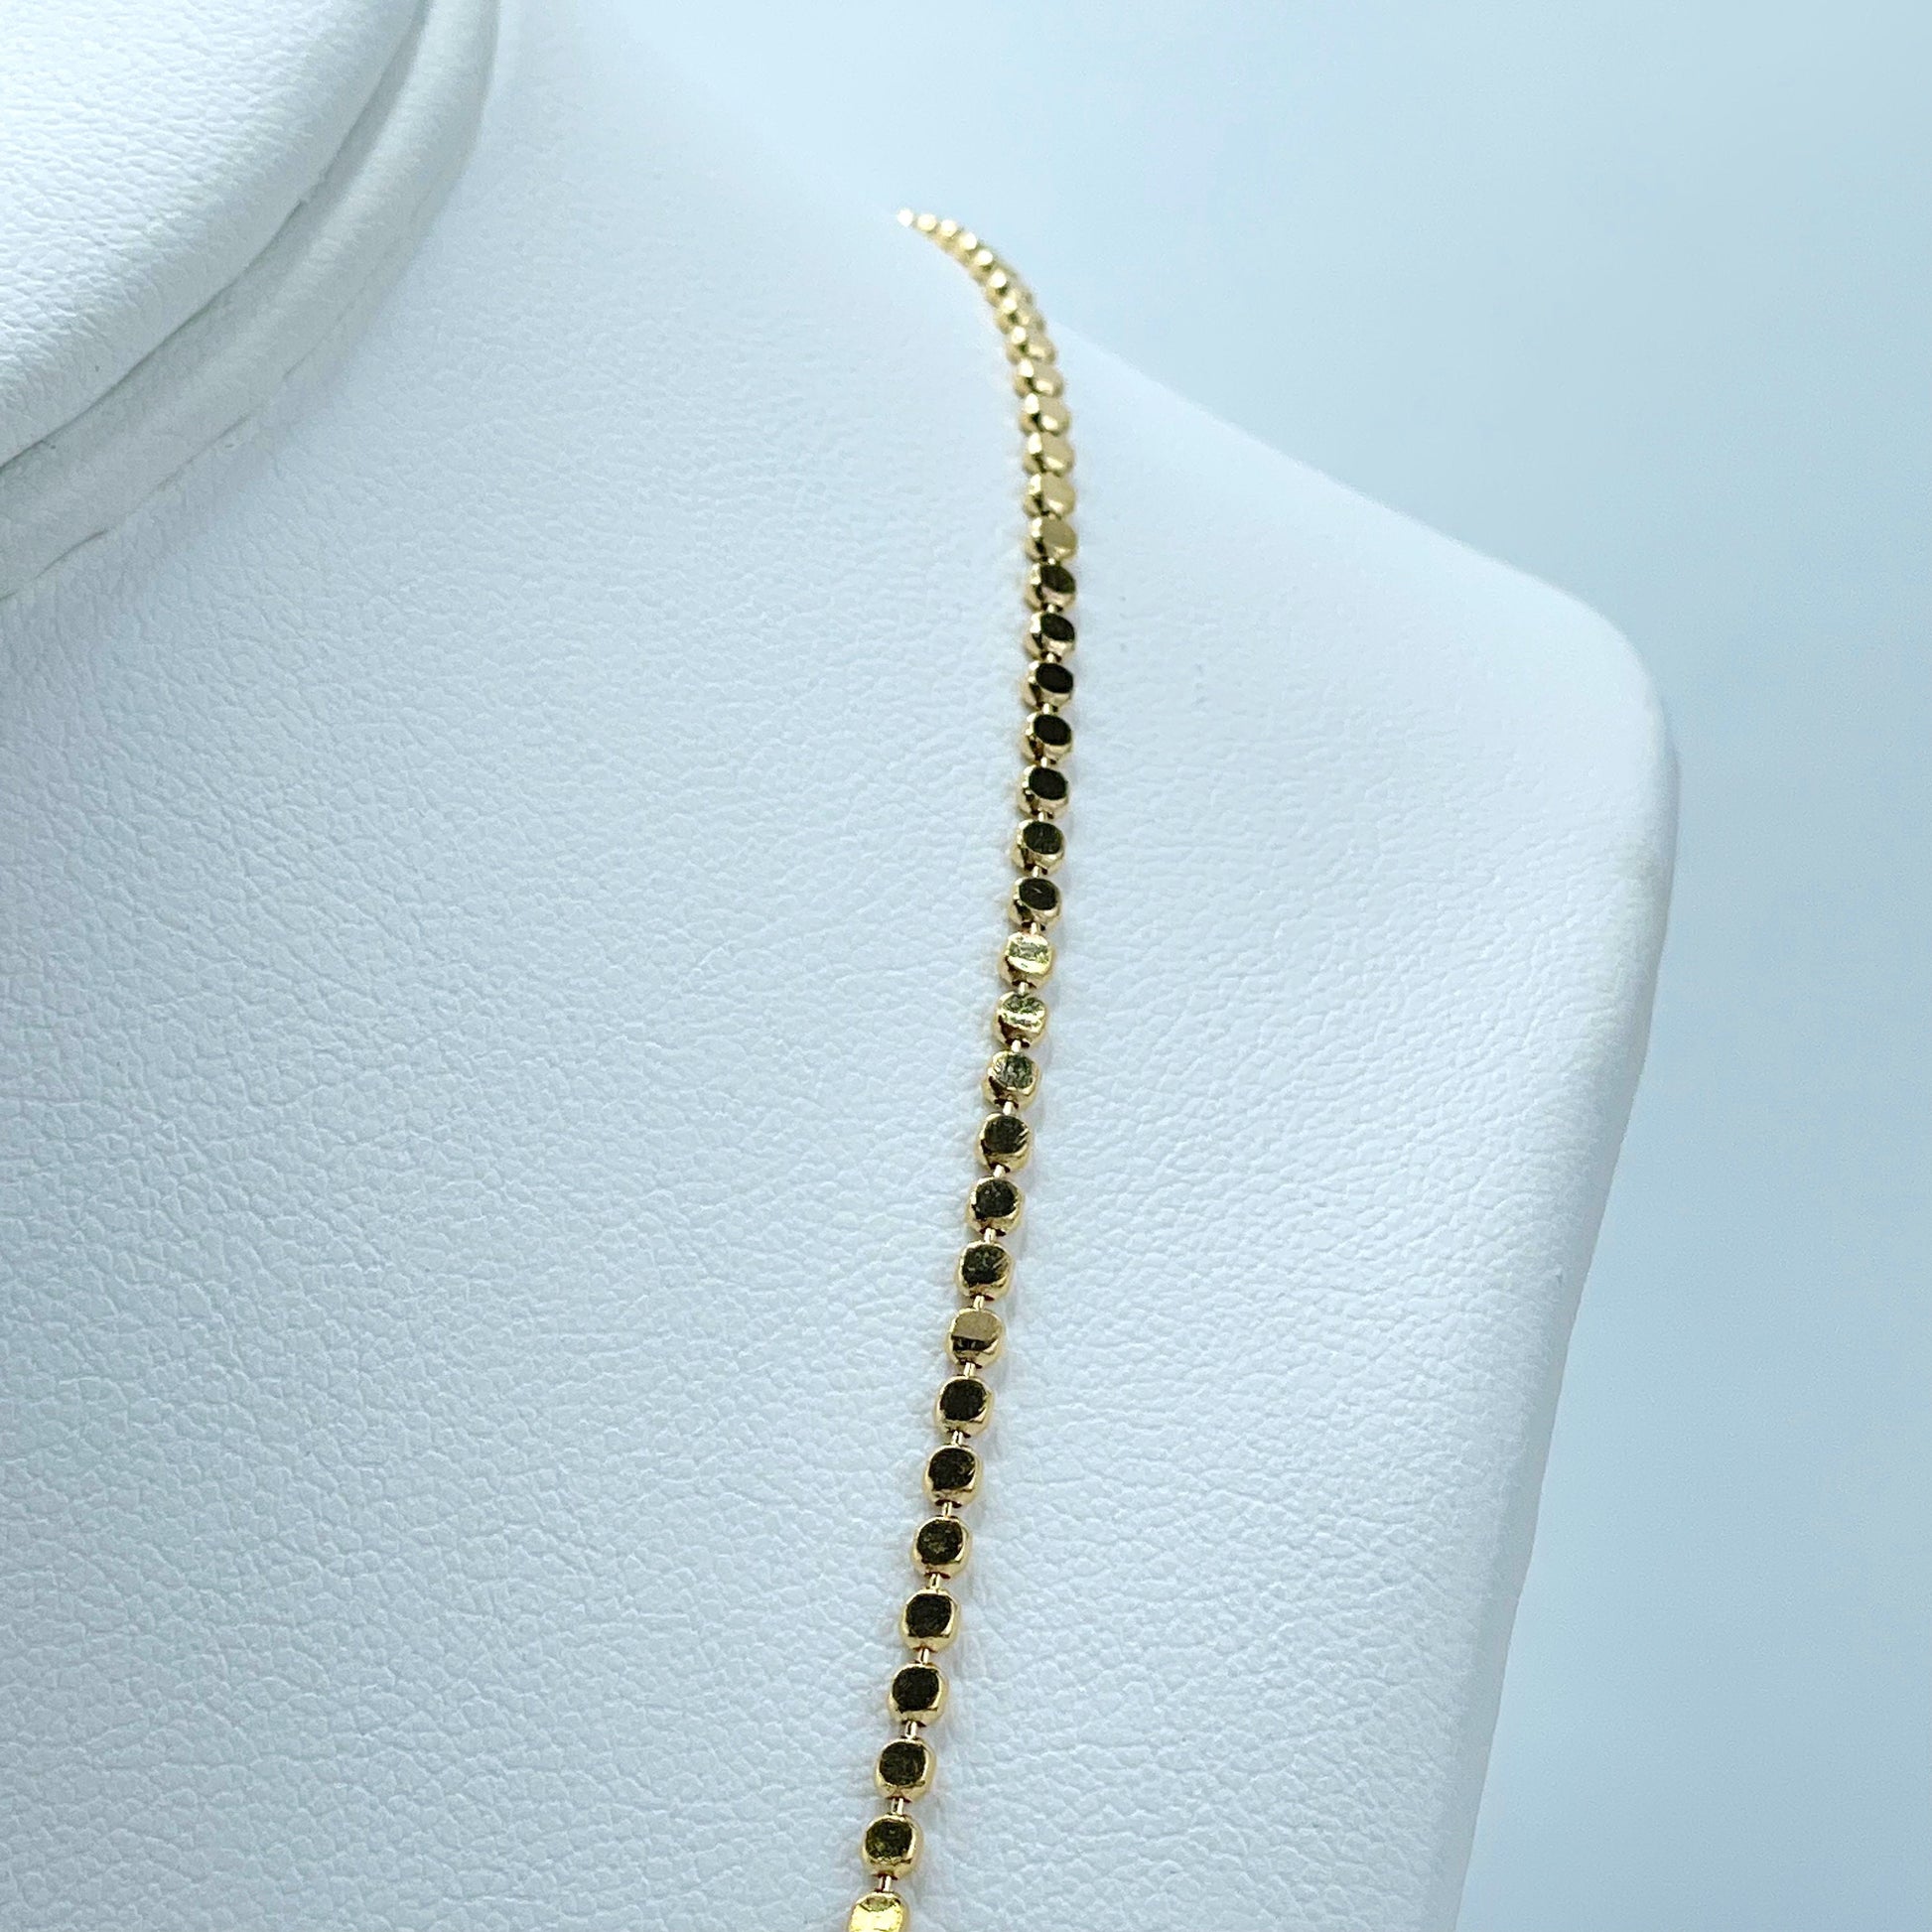 18k Gold Filled 1.5mm Dot Link Chain 18 or 24 inches Necklace Wholesale Jewelry Supplies